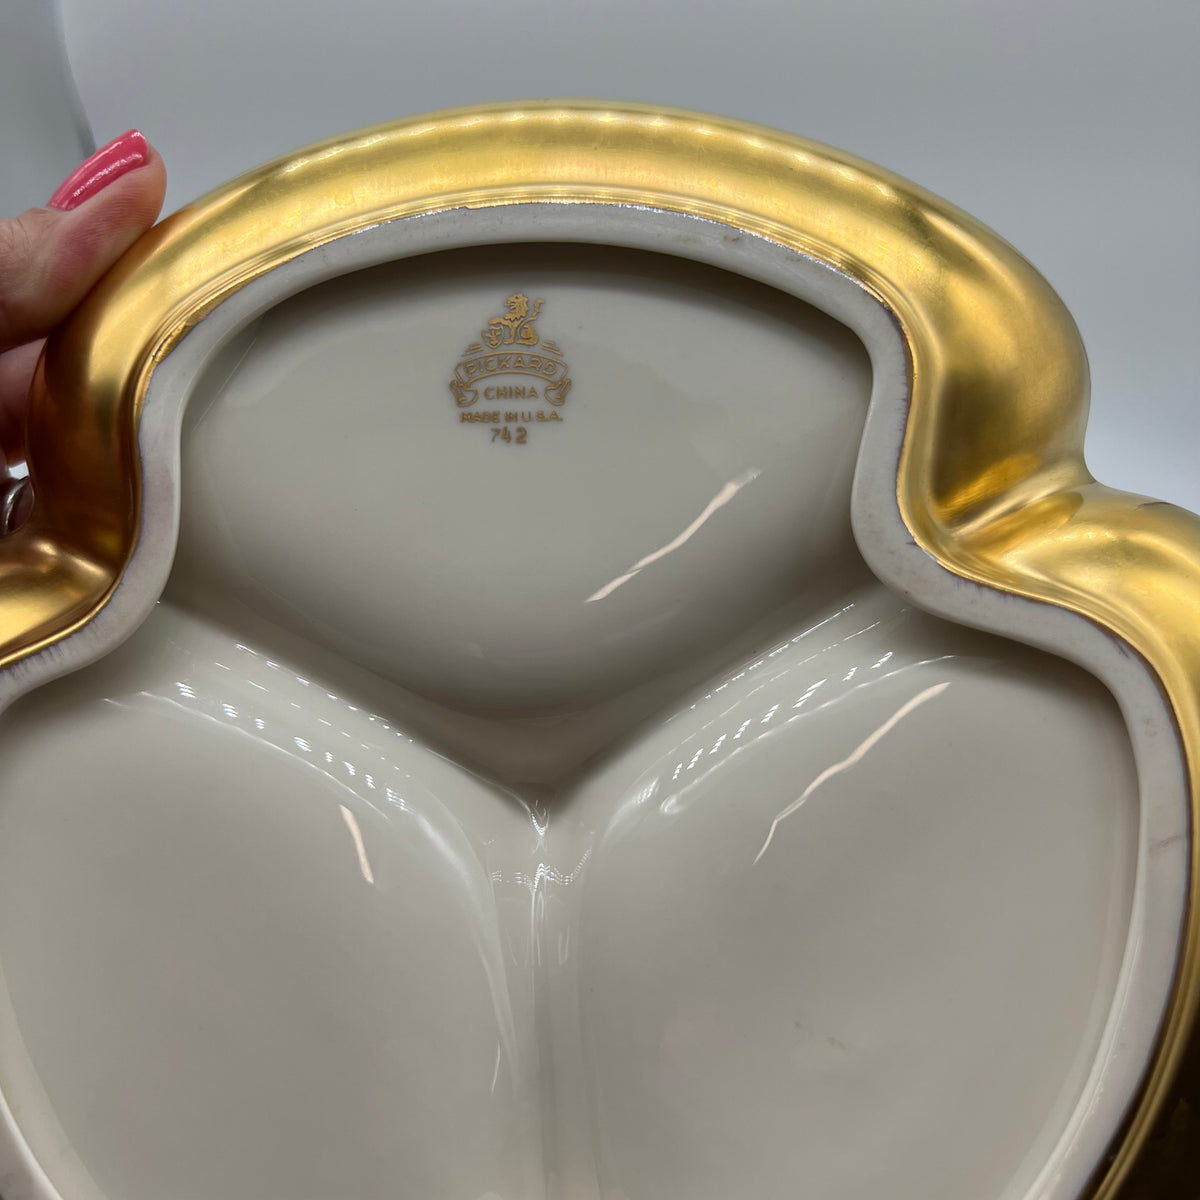 Pickard China, made in USA, 24k gold #742, divided dish - 3 sections, rose and daisy motif, excellent condition, no chips or cracks, post World War II production, approximately 8.25" diameter with scalloped edge.